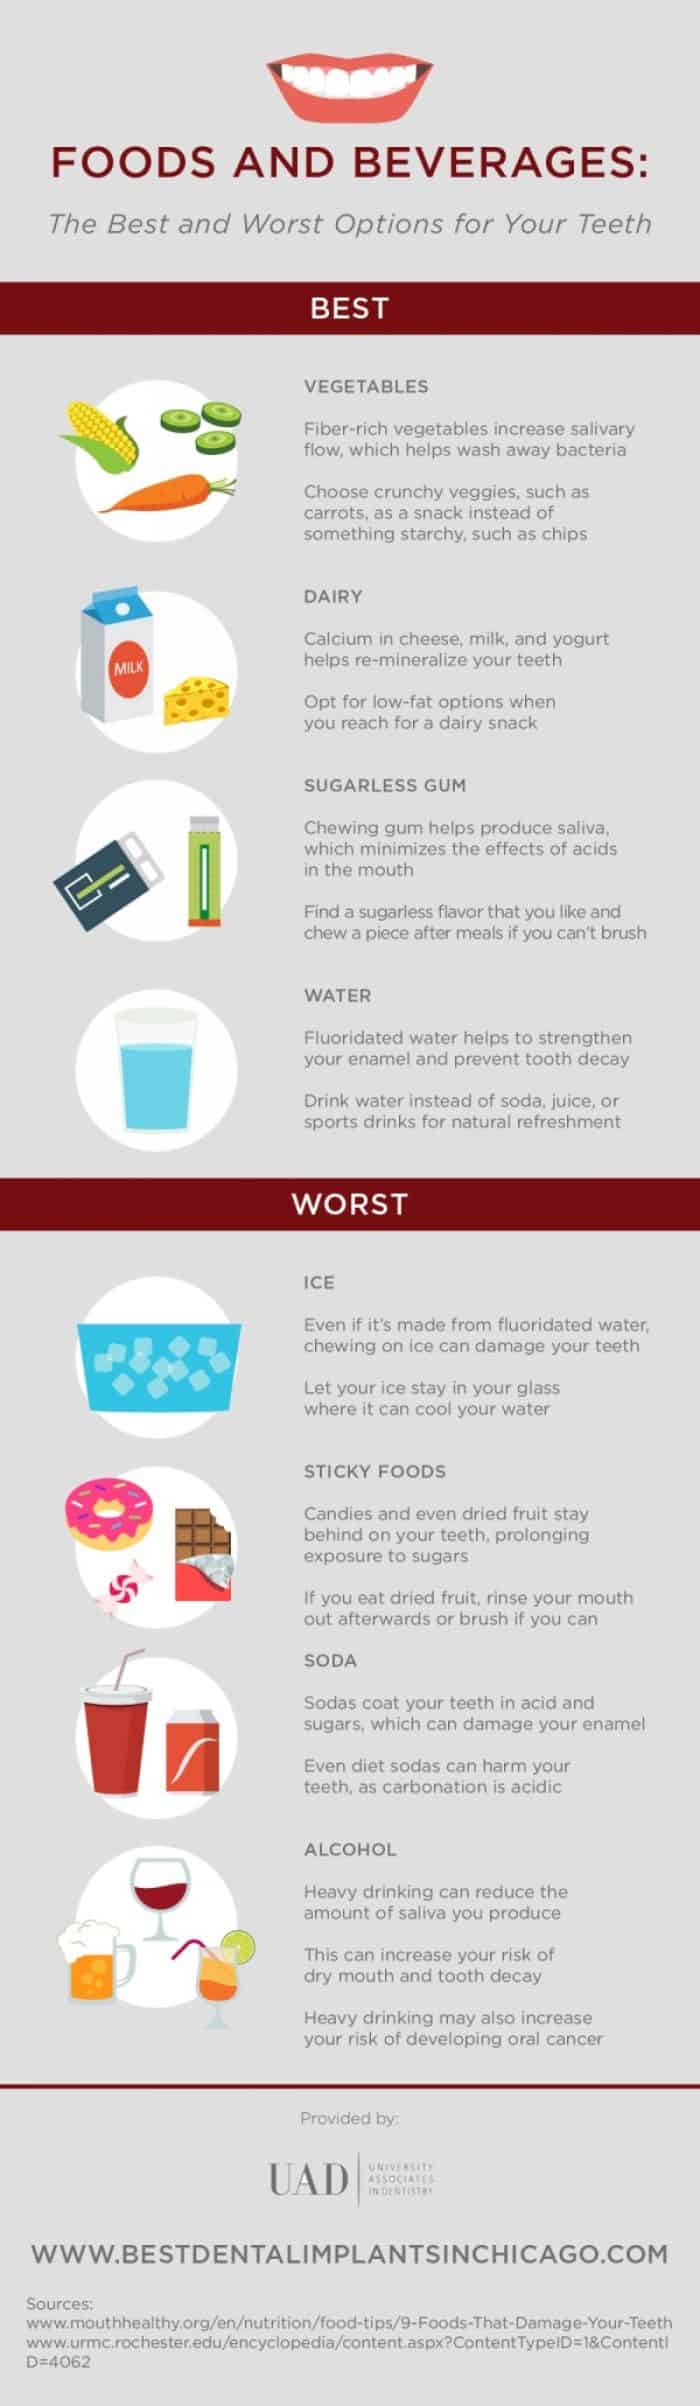 the best and worst Foods and beverages for your teeth infographic